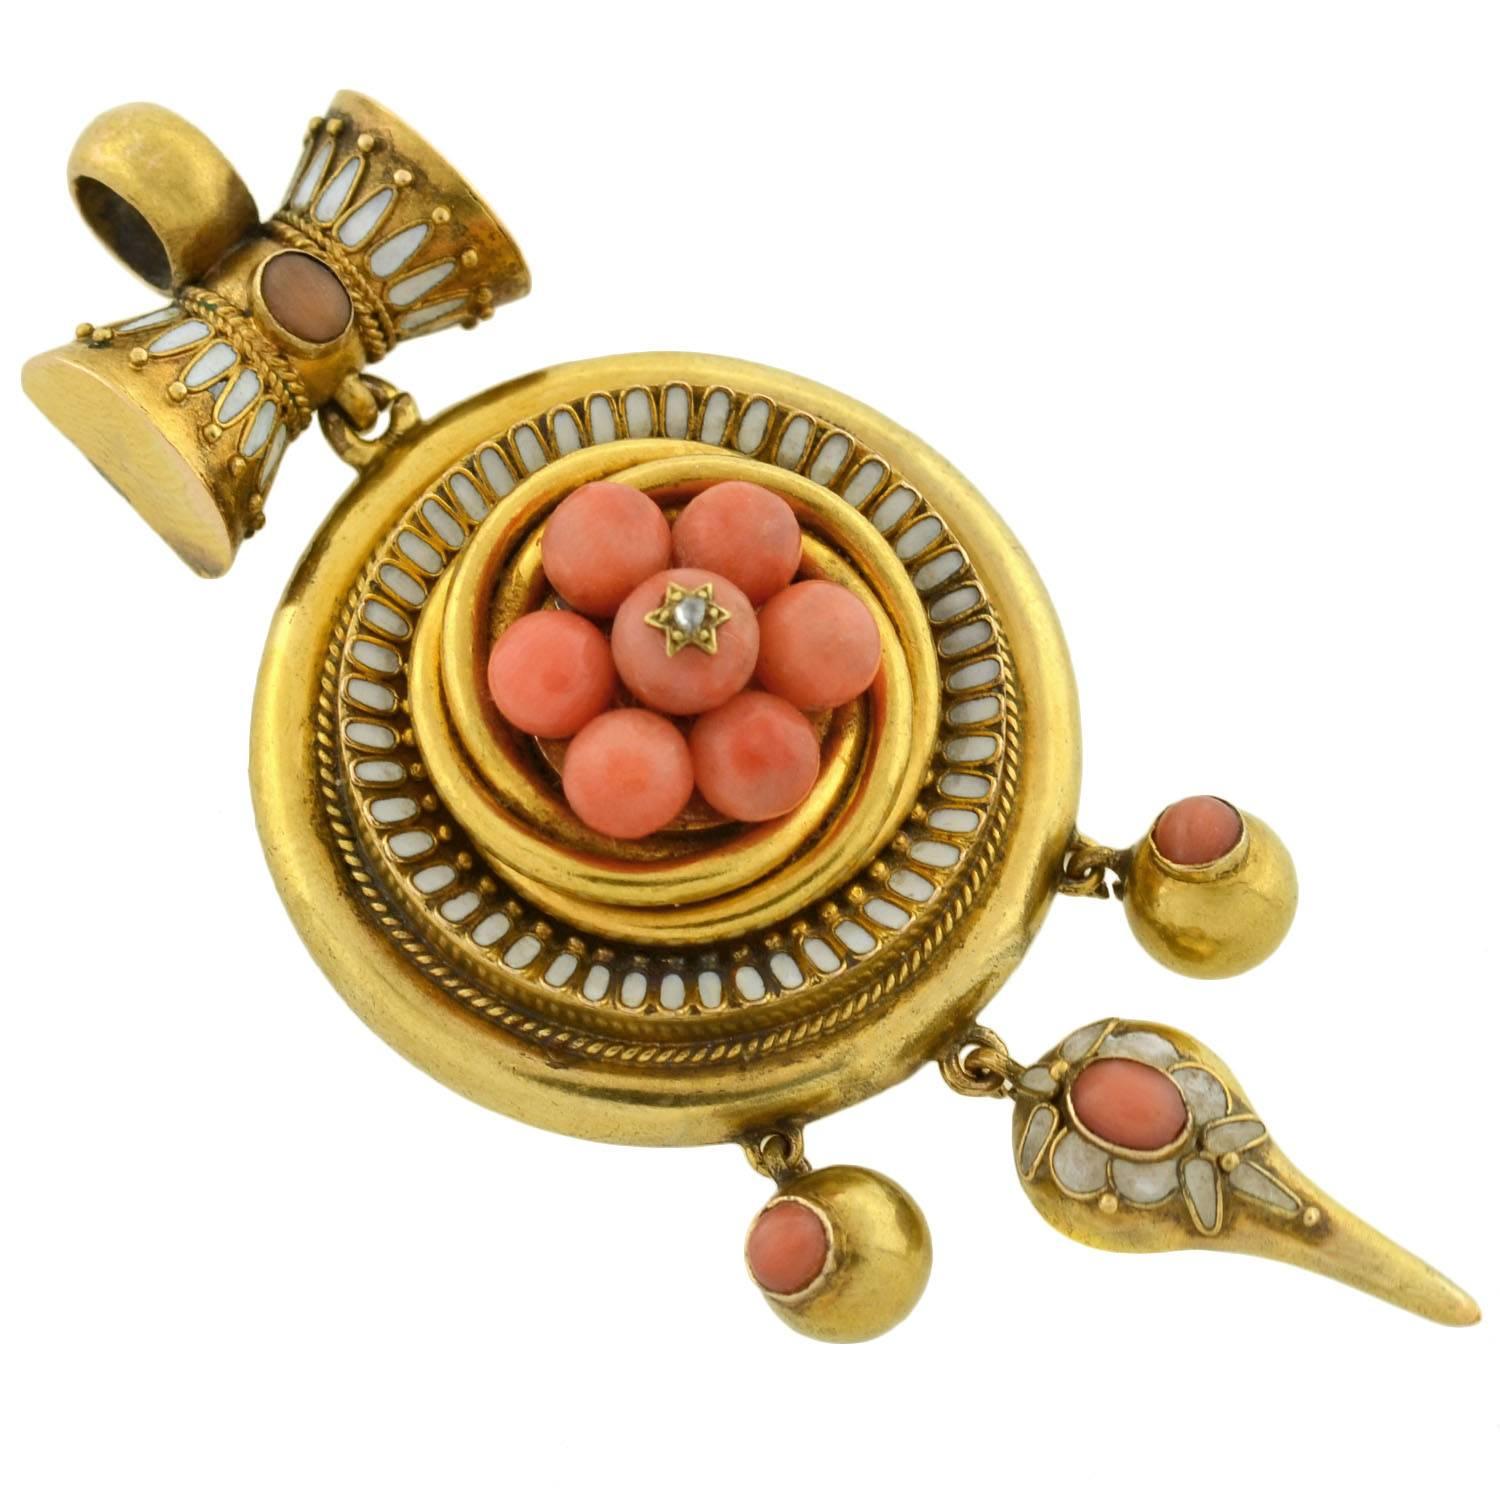 A magnificent coral locket/pendant from the Victorian (ca1880) era! Made of vibrant 18kt gold, the piece is highly detailed and particularly large in size. A cluster of 7 coral cabochons rest at the center, which are smoothly polished and display